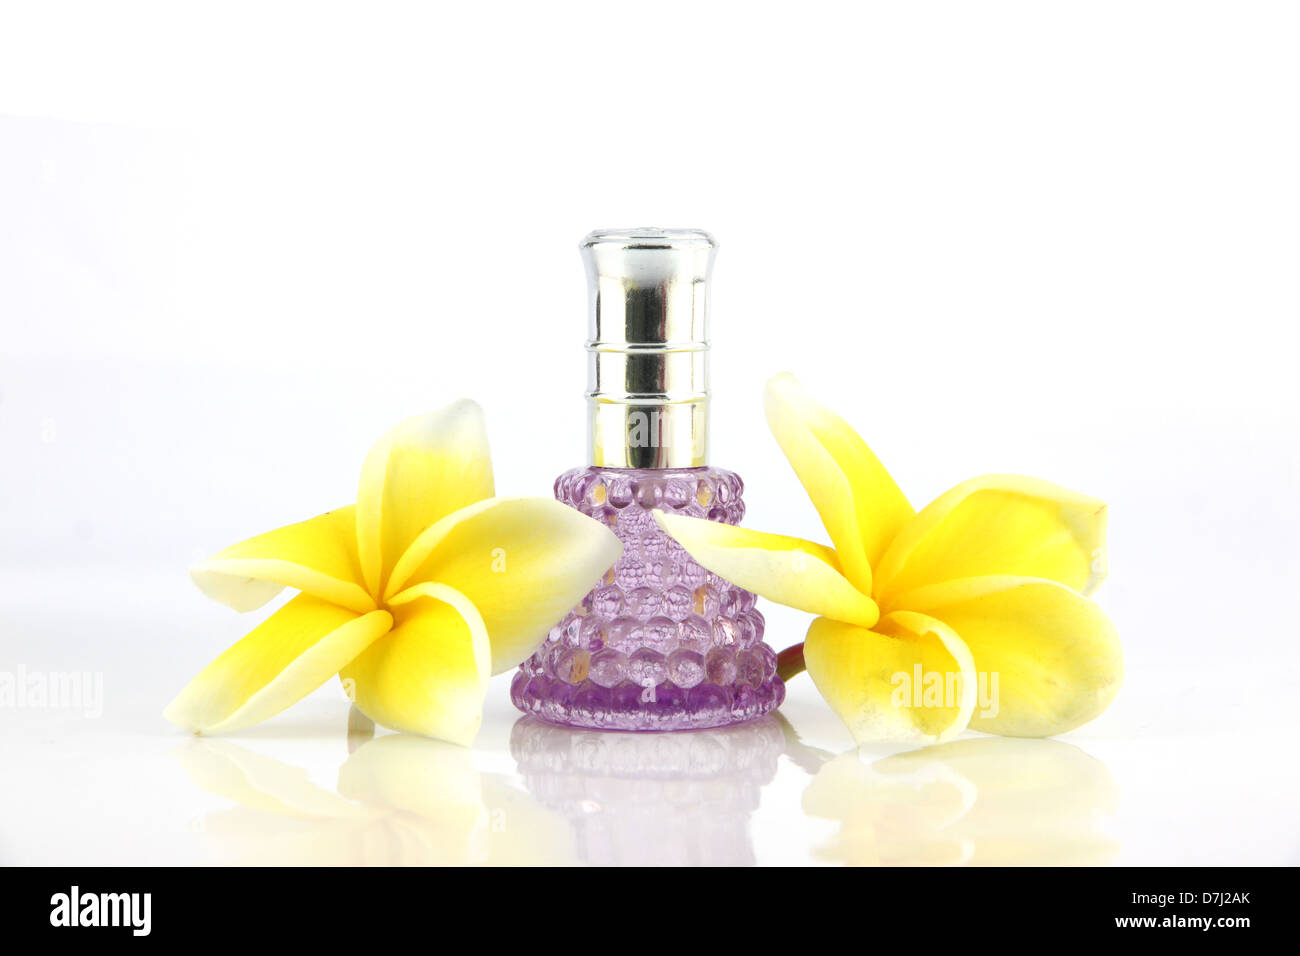 Yellow flowers and violet Perfume bottles on the white background. Stock Photo